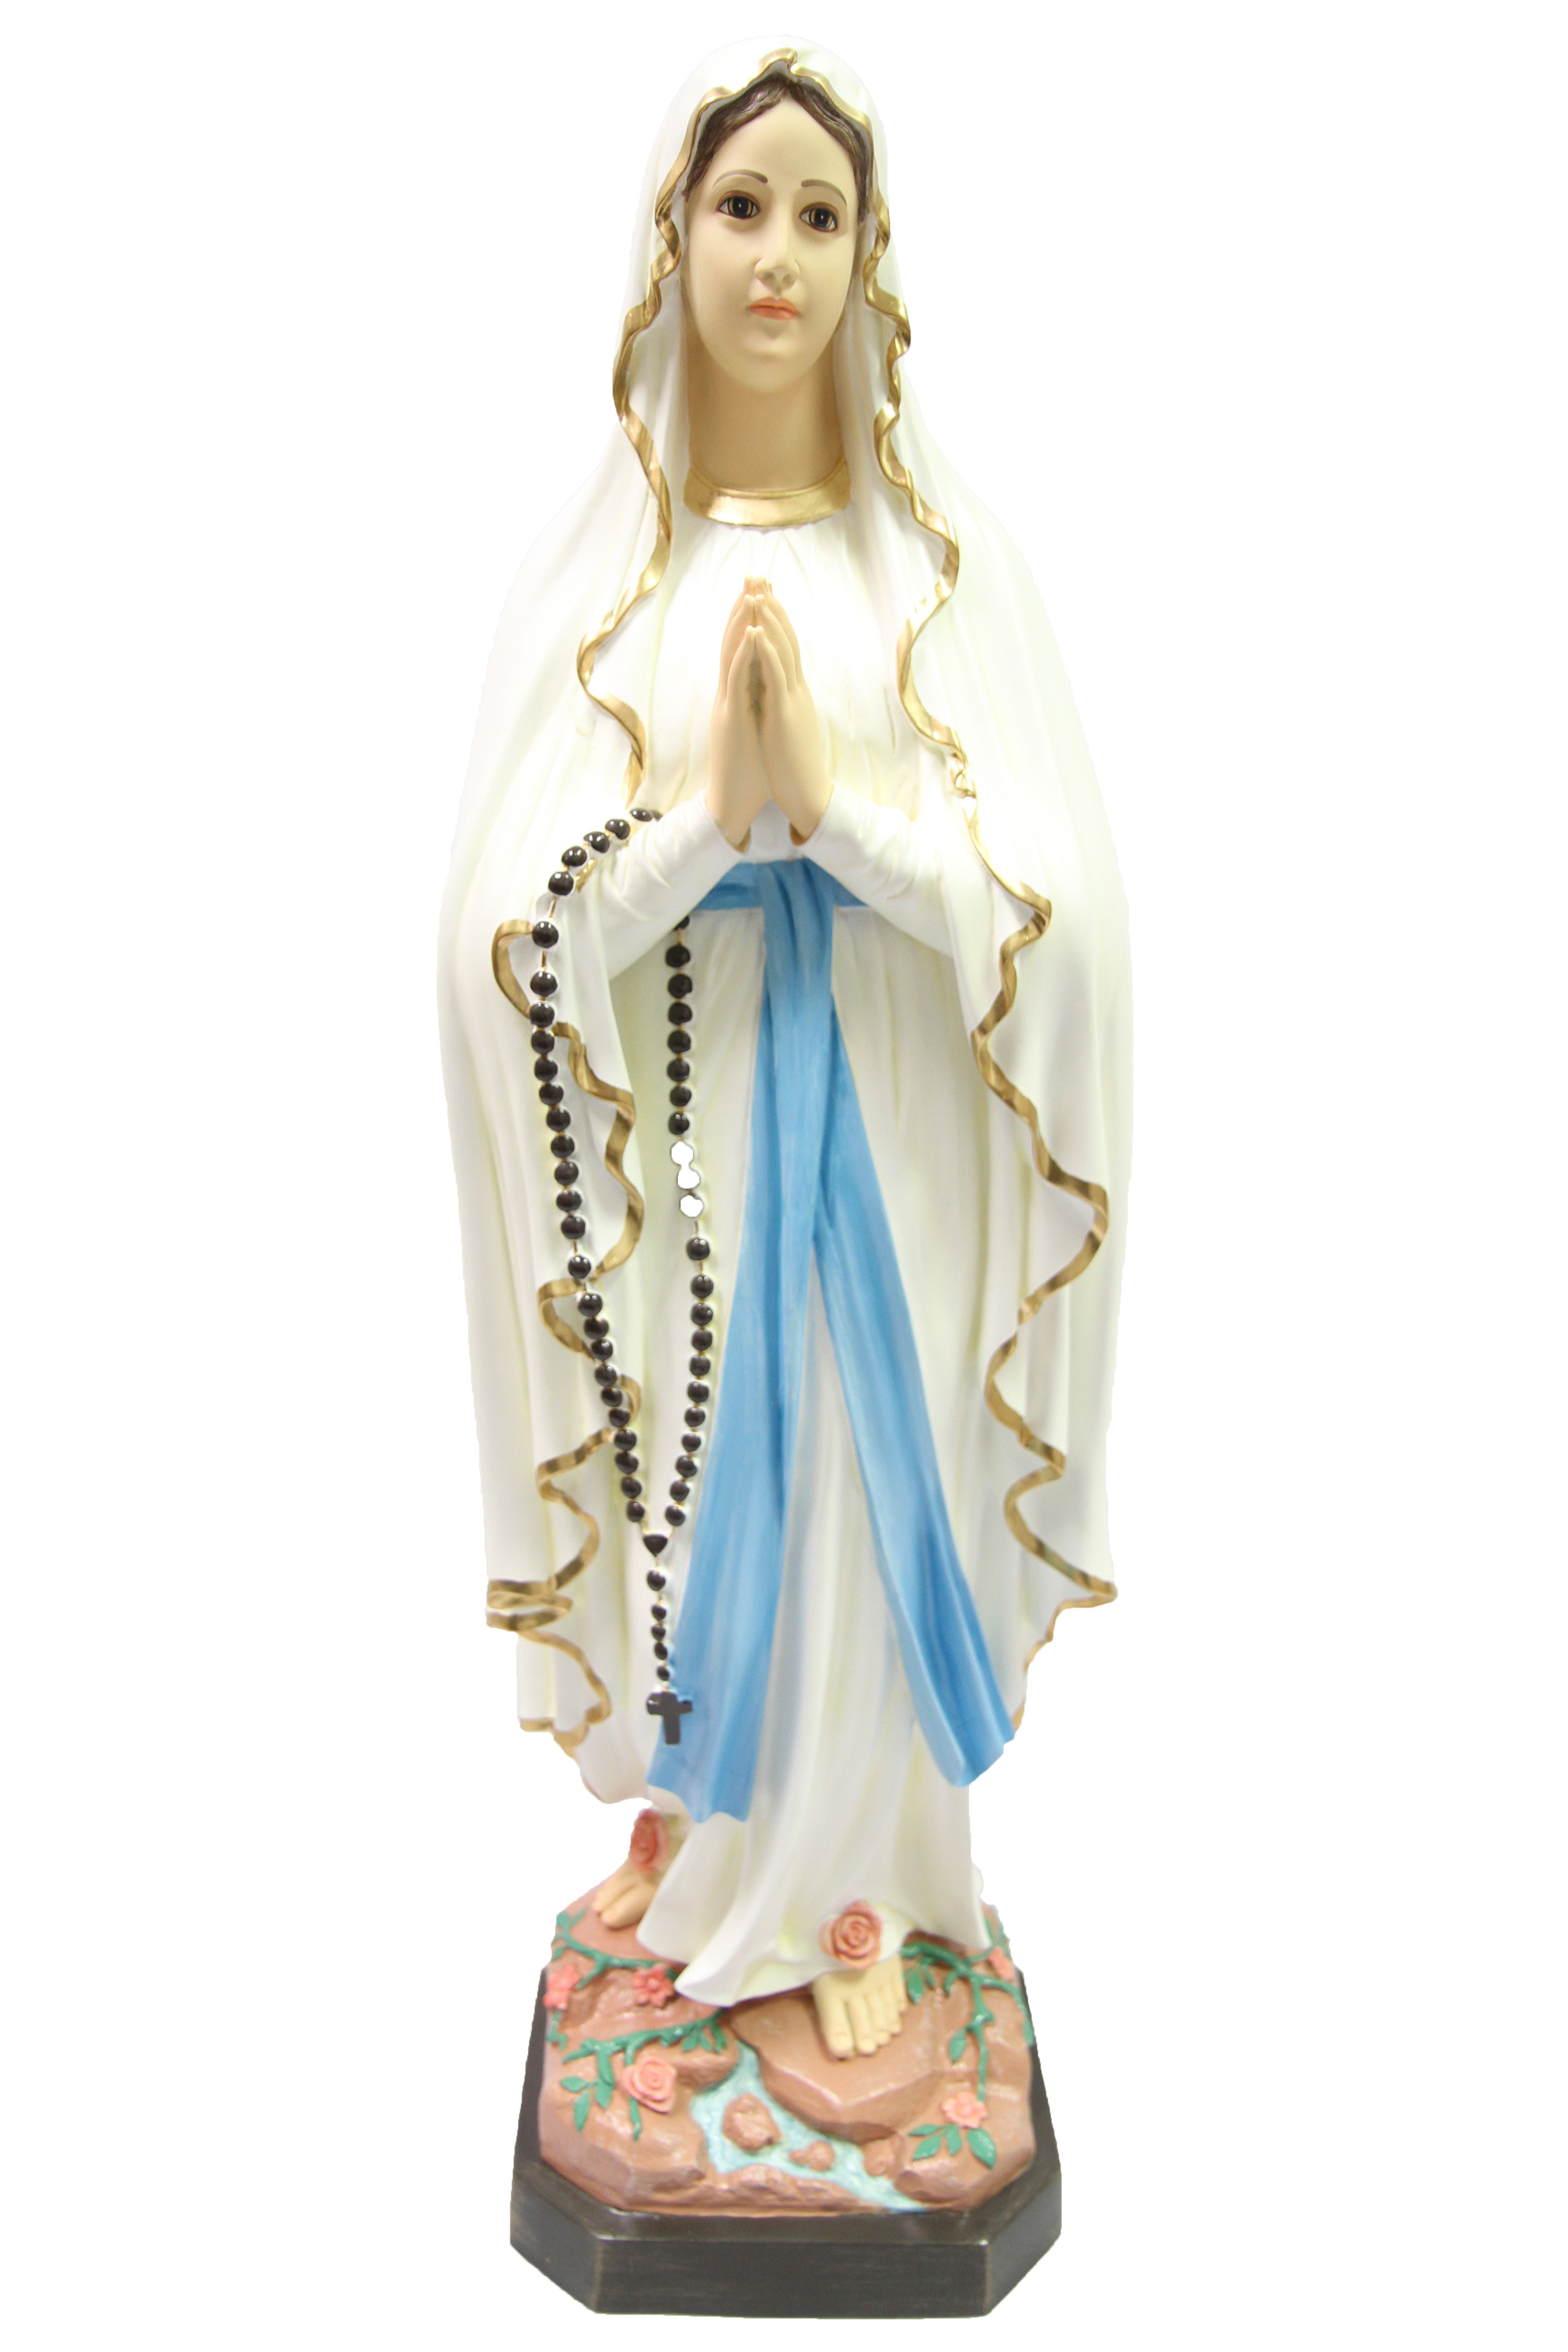 32 Inch Our Lady of Lourdes Virgin Mary Catholic Statue Sculpture Vittoria Collection Made in Italy Indoor Outdoor Garden